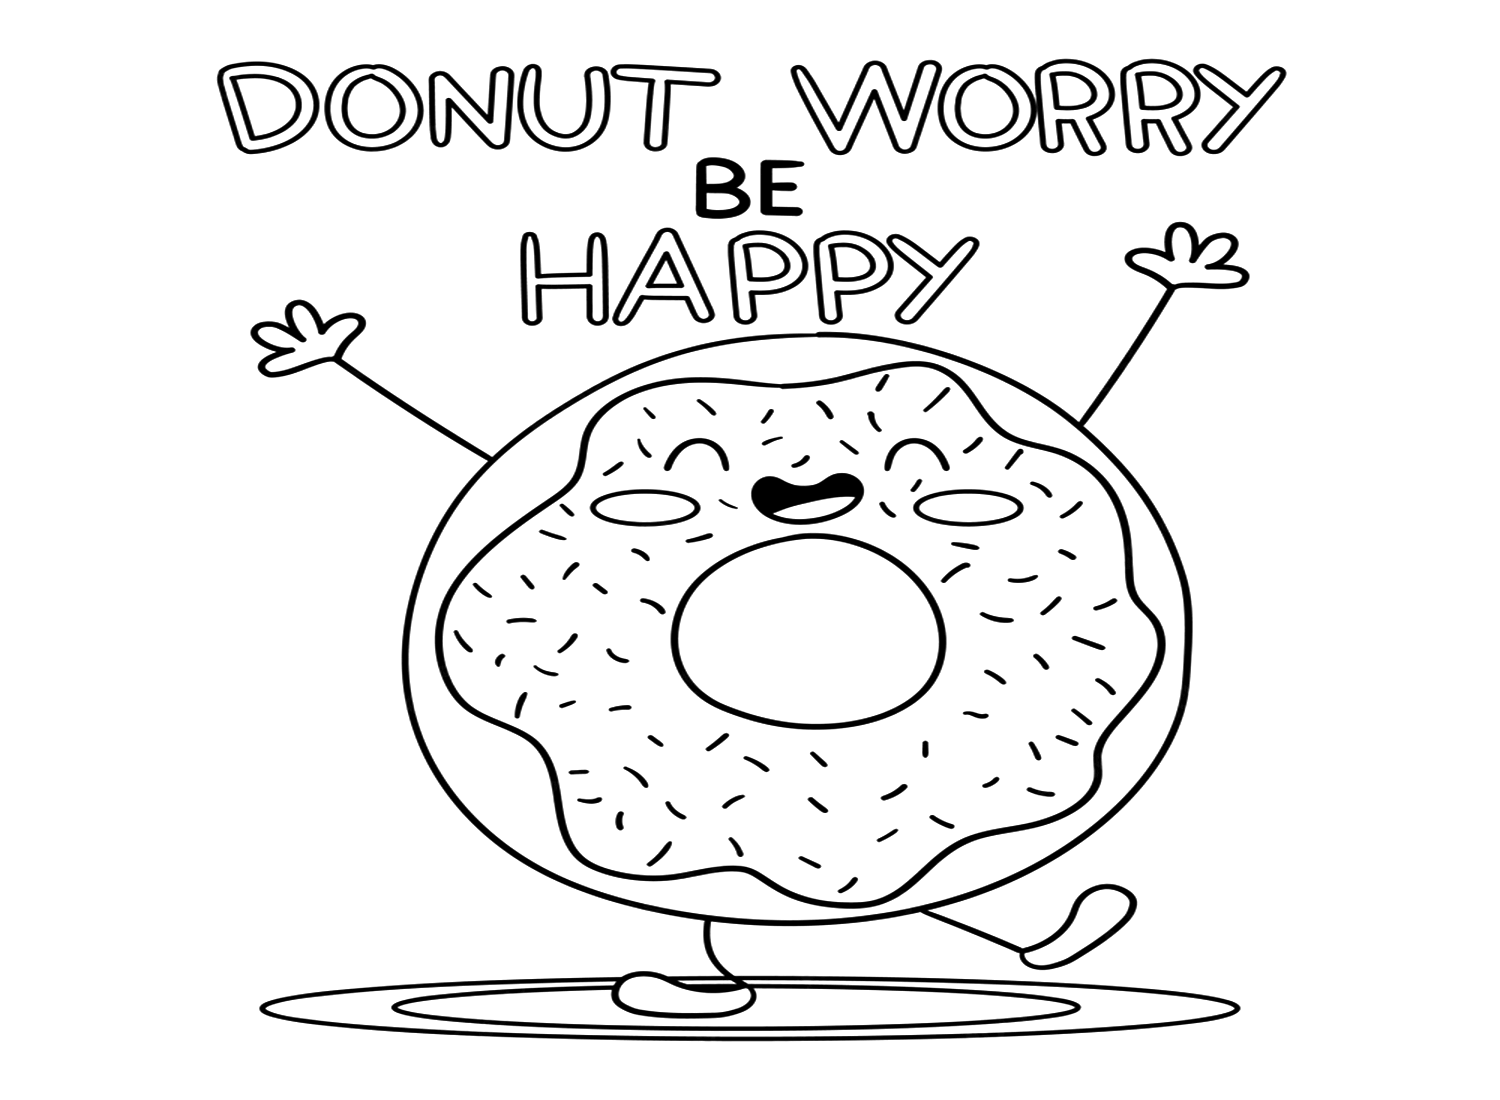 Donut Worry Be Happy Coloring Page from Donut